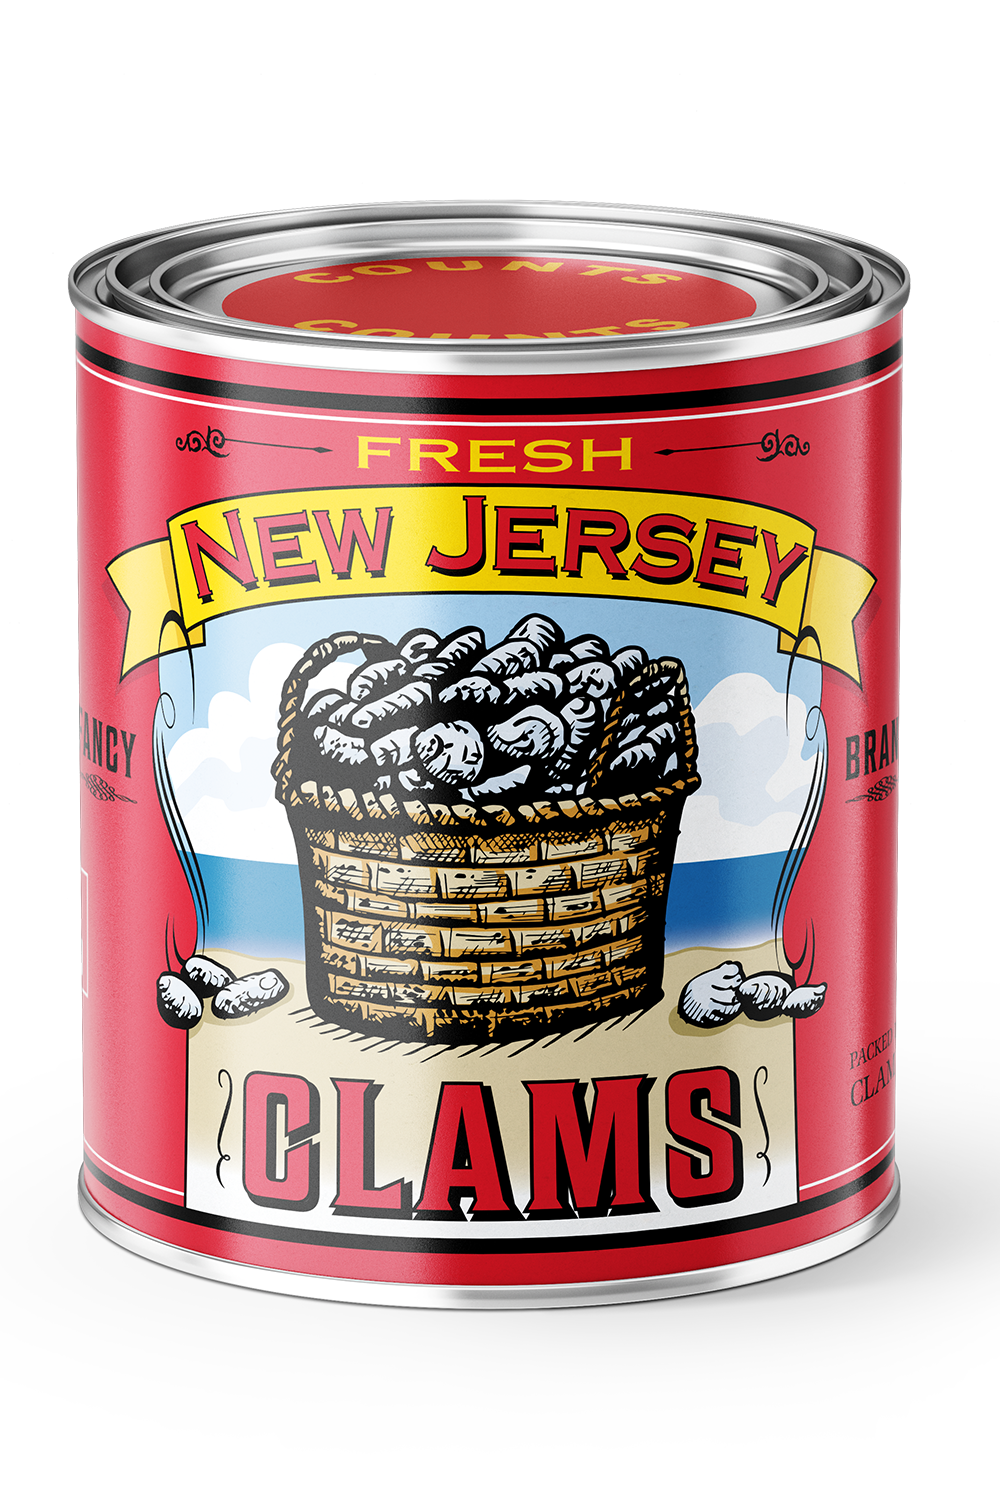 SIDEWALK SALE ITEM - Vintage Oyster Can Candle - New Jersey Clams